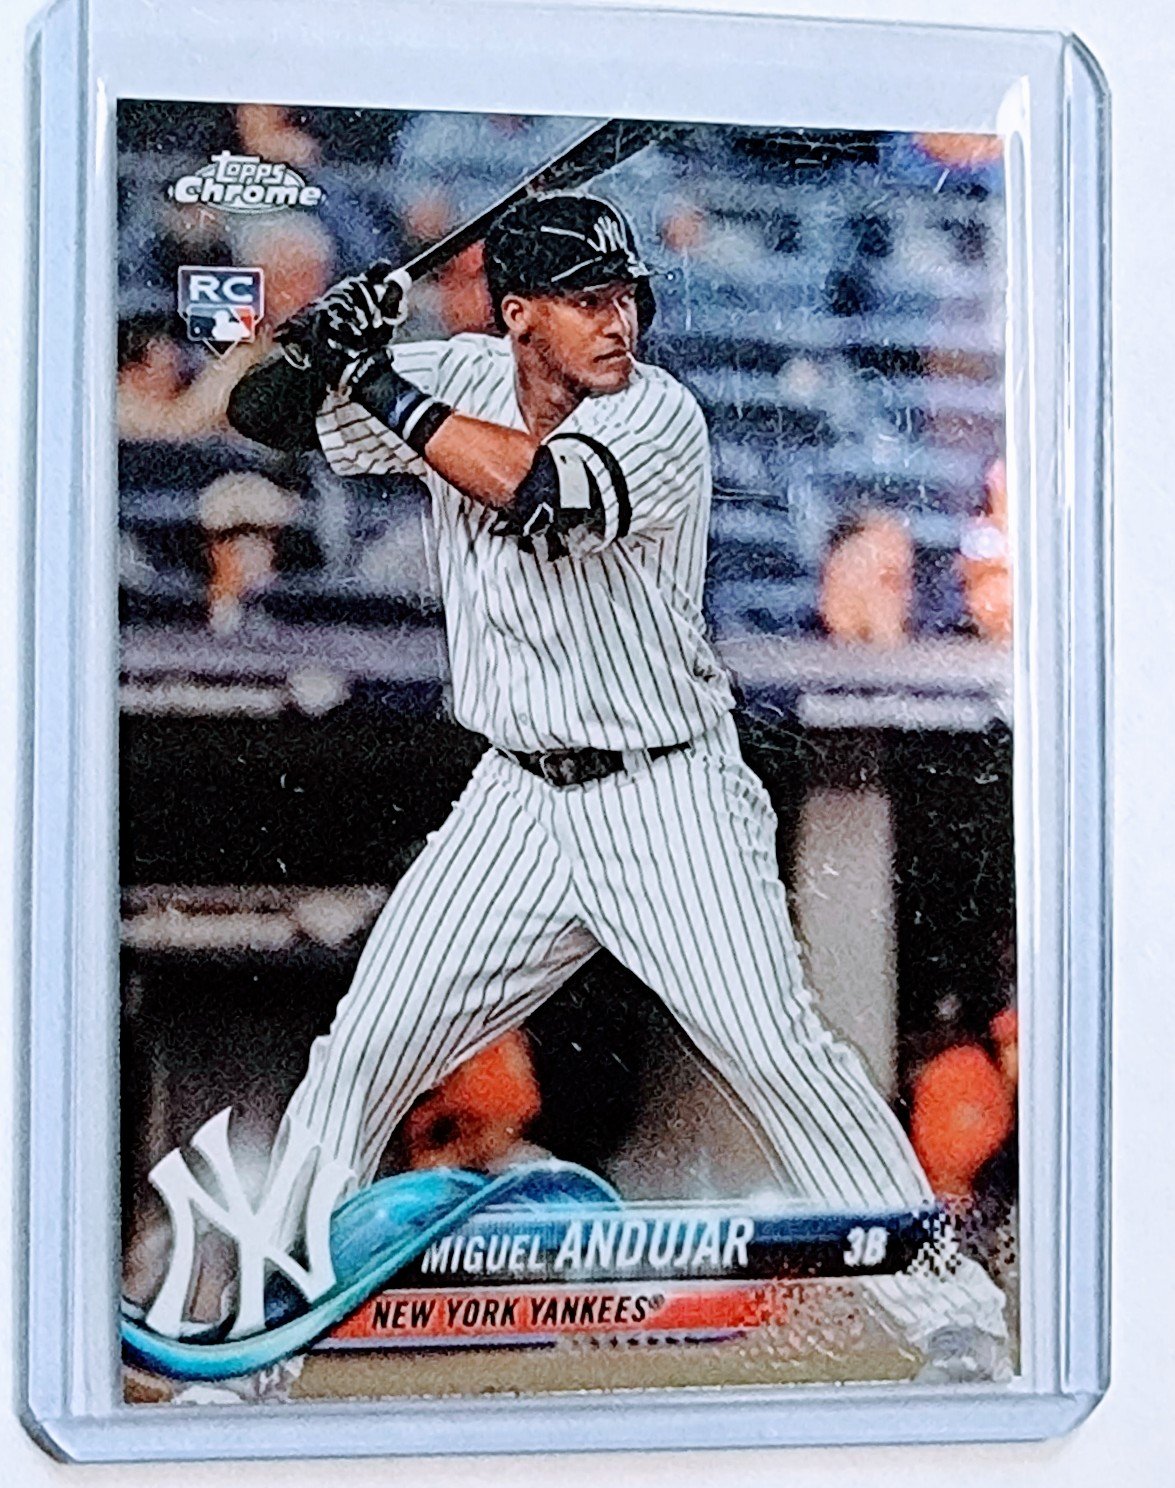 2018 Topps Chrome Miguel Andujar Rookie Baseball Card TPTV simple Xclusive Collectibles   